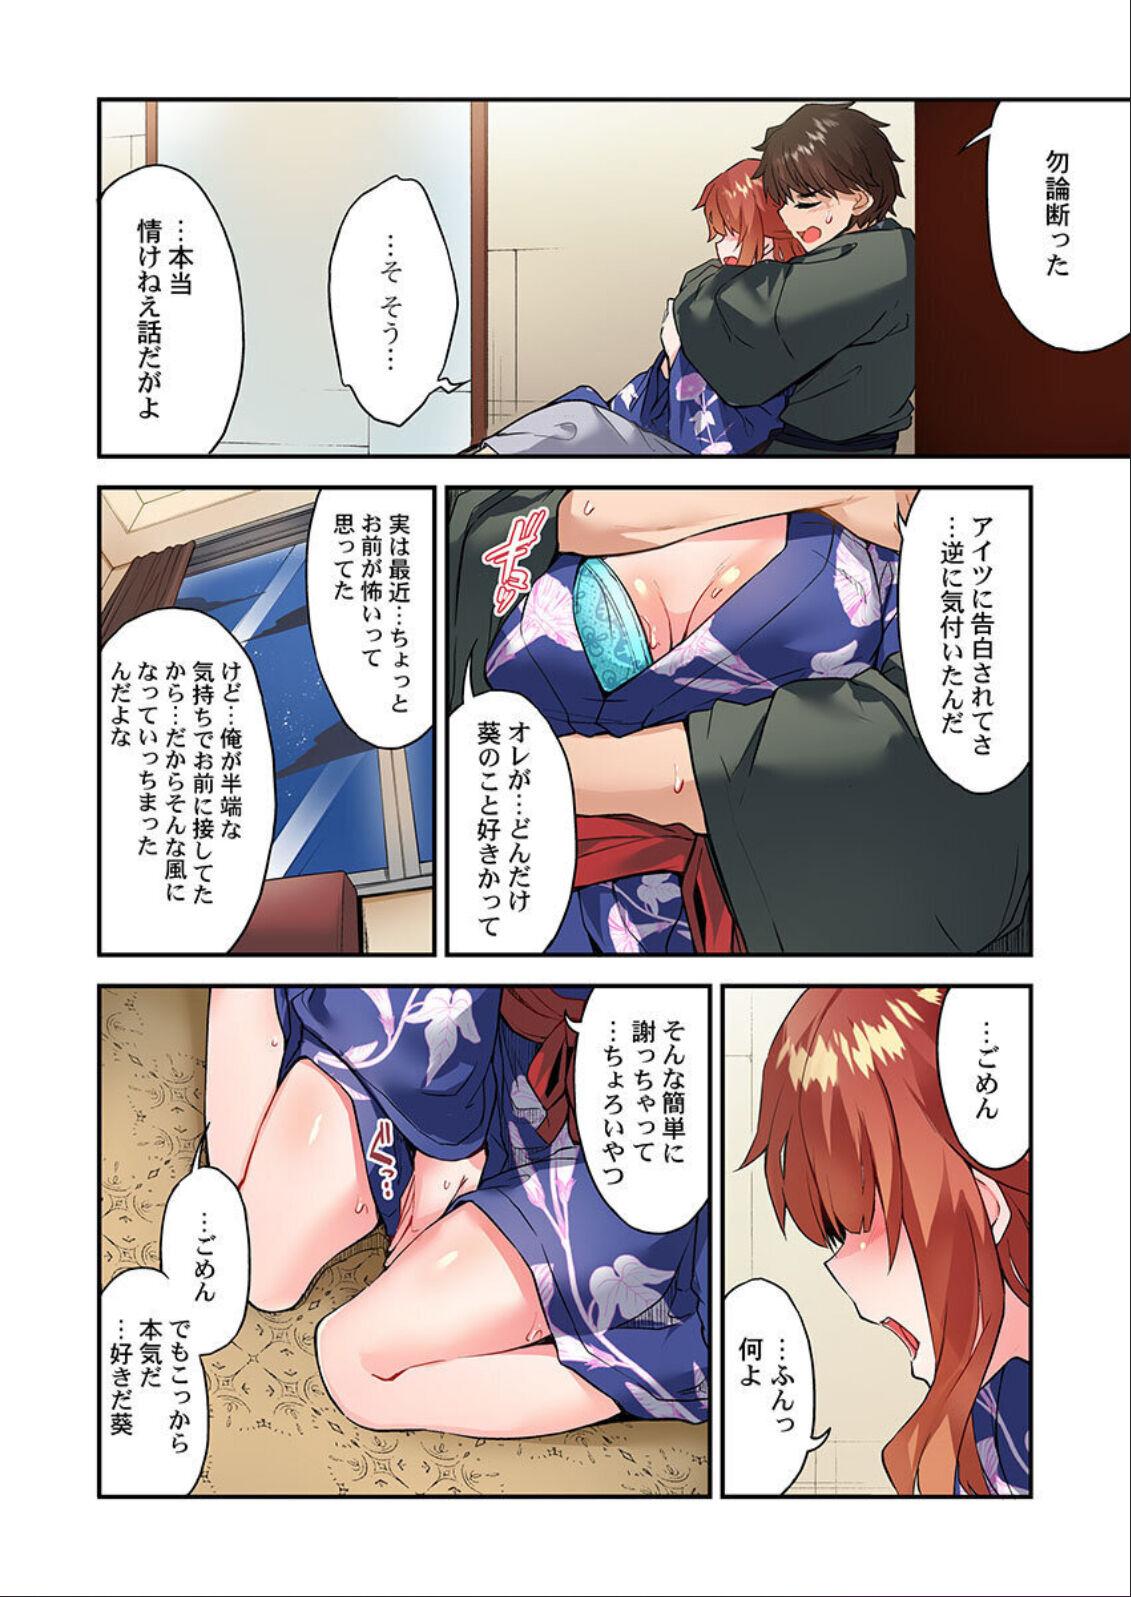 Traditional Job Of Washing Girls' Body Ch. 45-51 and brand new CH. 57 138